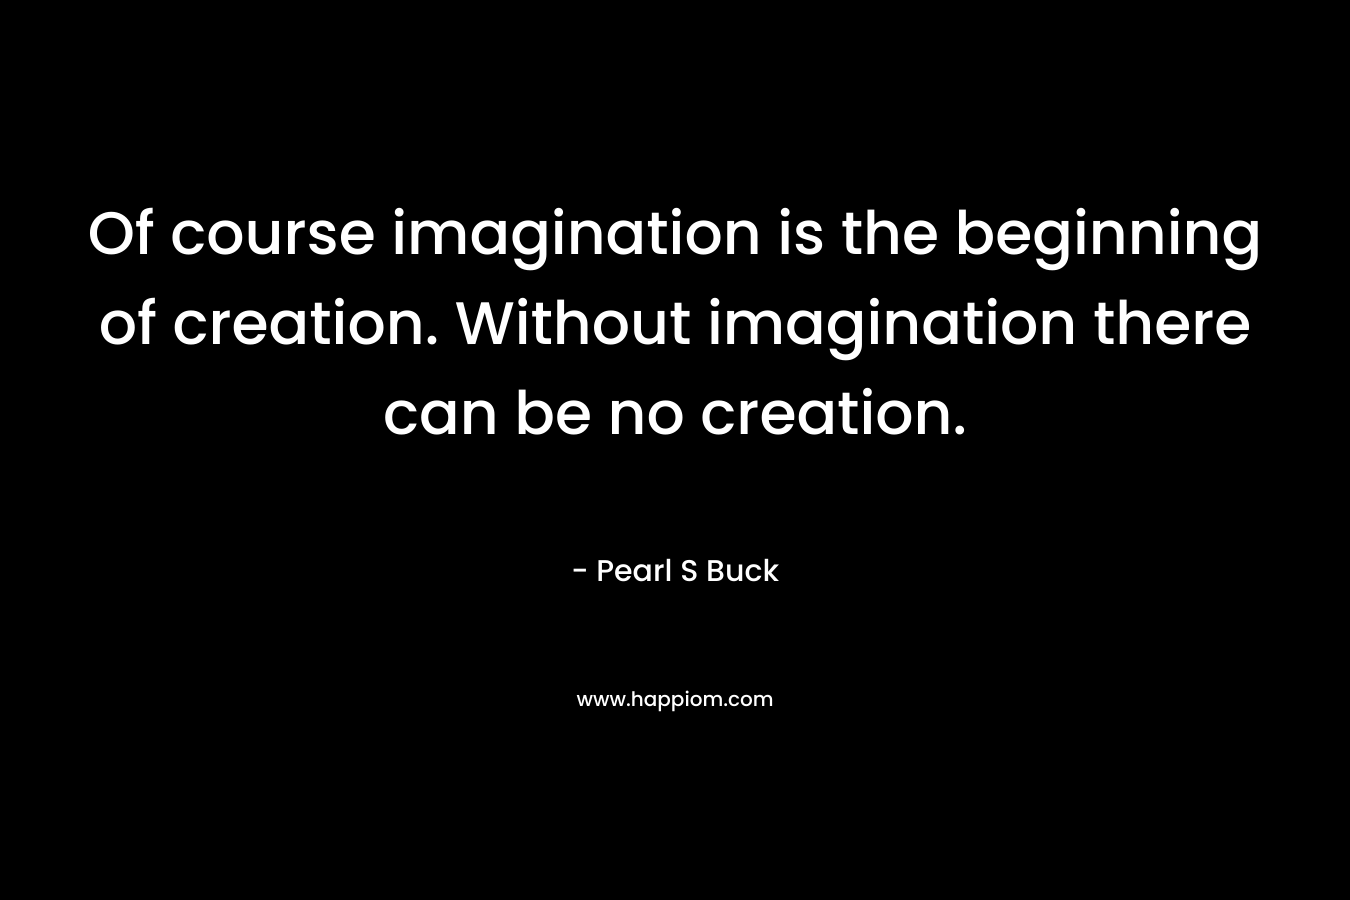 Of course imagination is the beginning of creation. Without imagination there can be no creation.